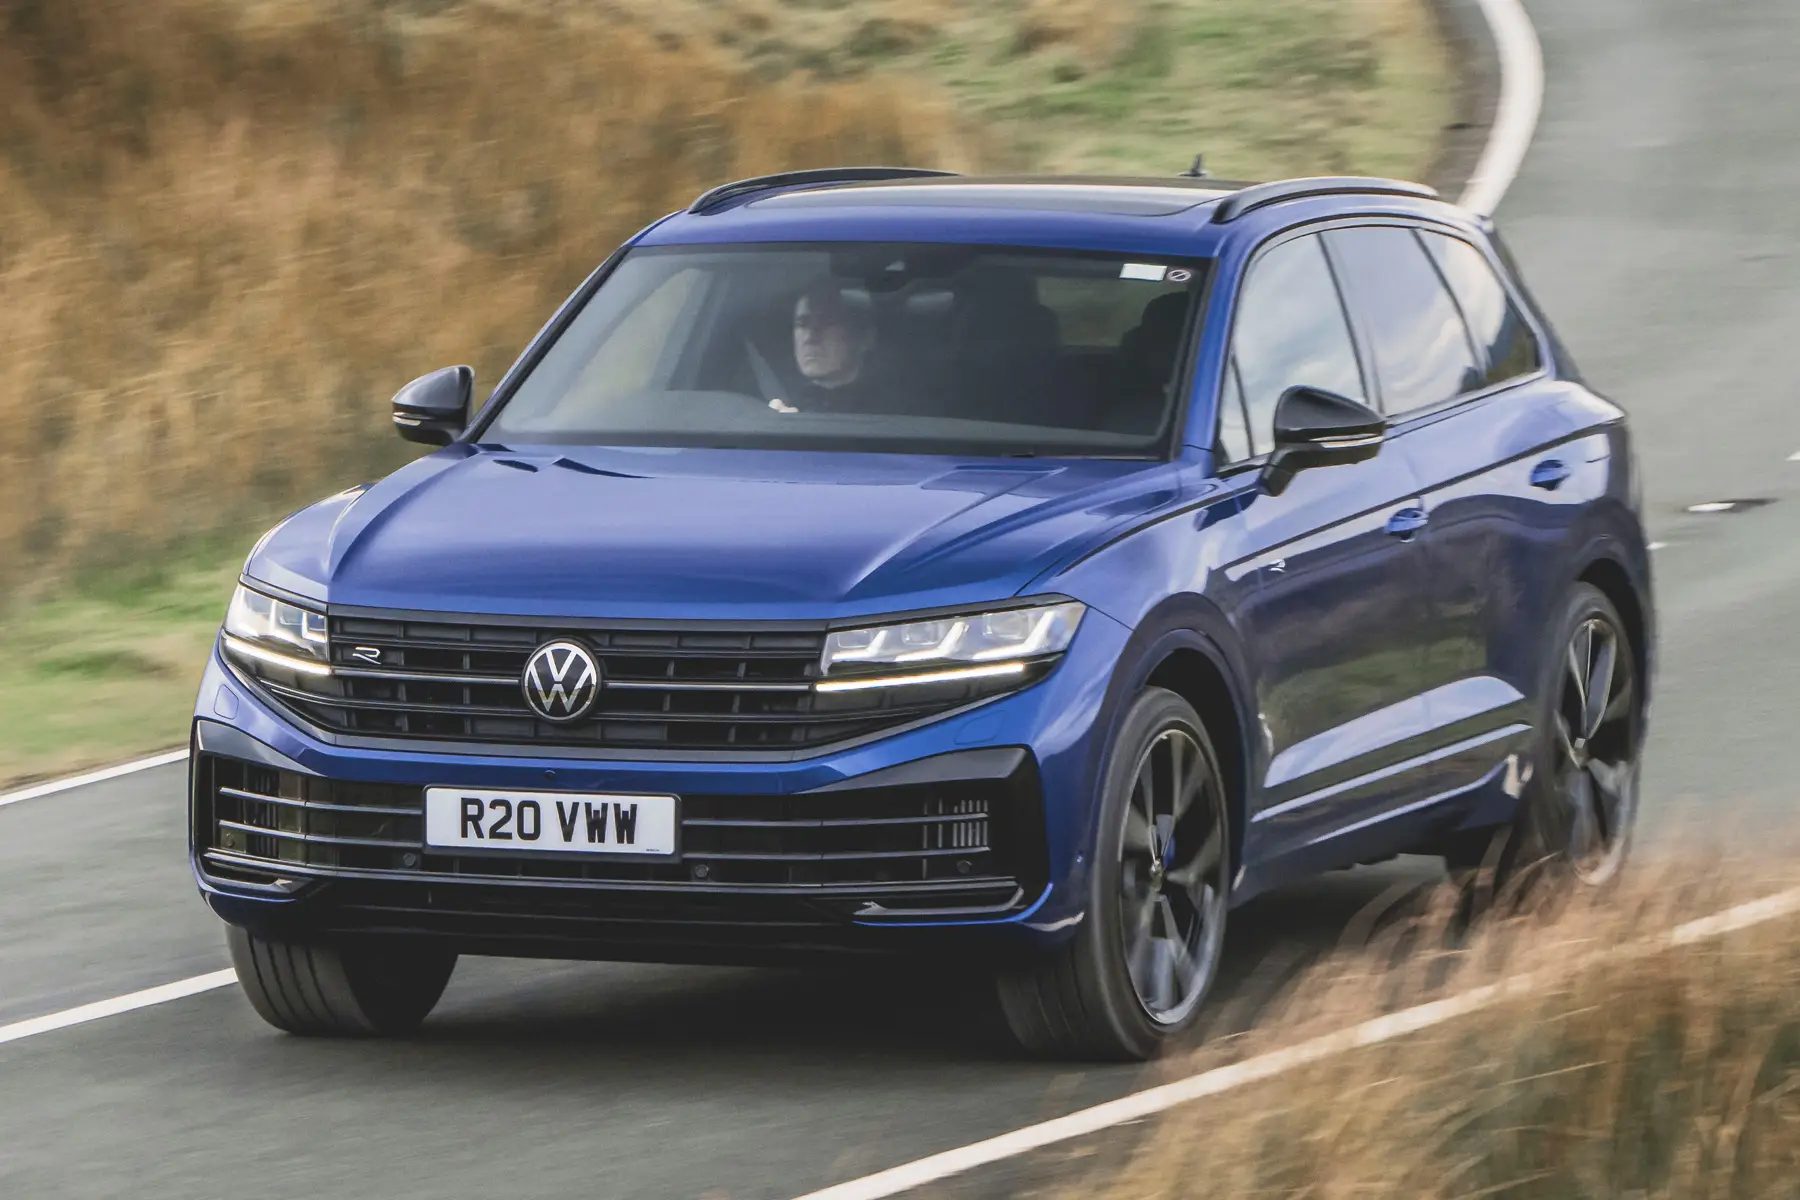 There's an all-new VW Touareg, but it's not for us